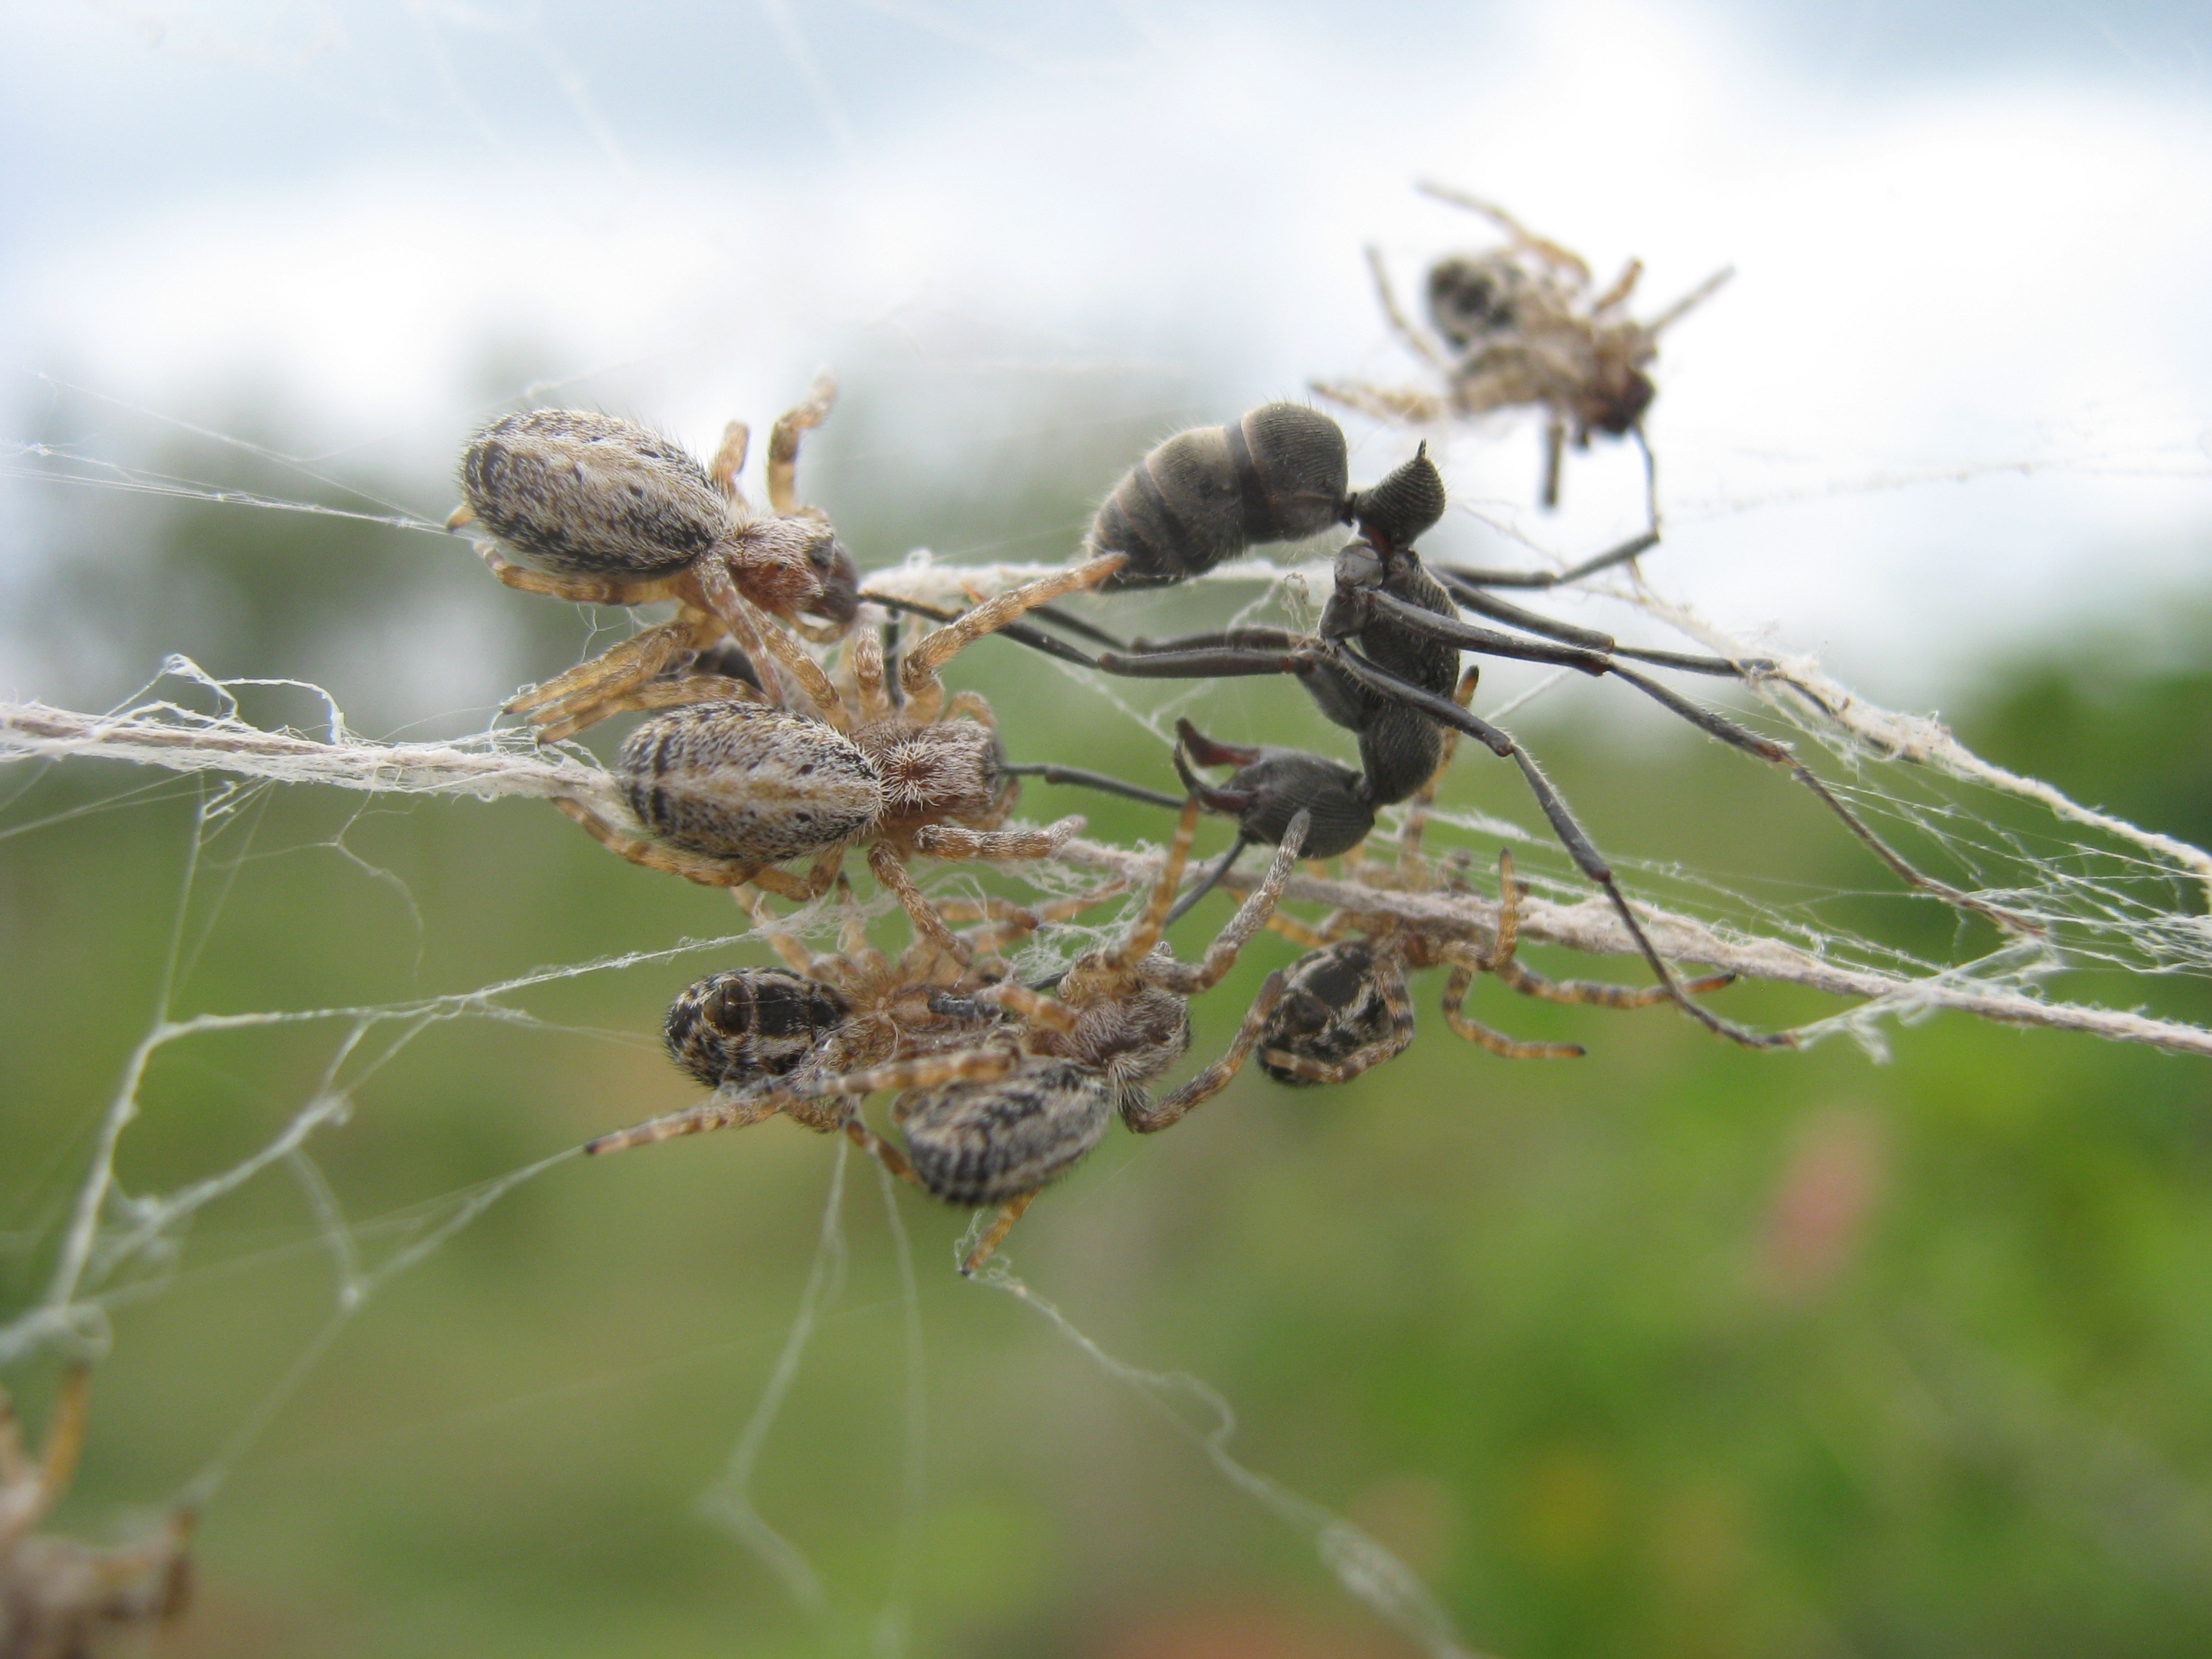 Research shows social spiders have different ways of hunting in groups |  University of Portsmouth